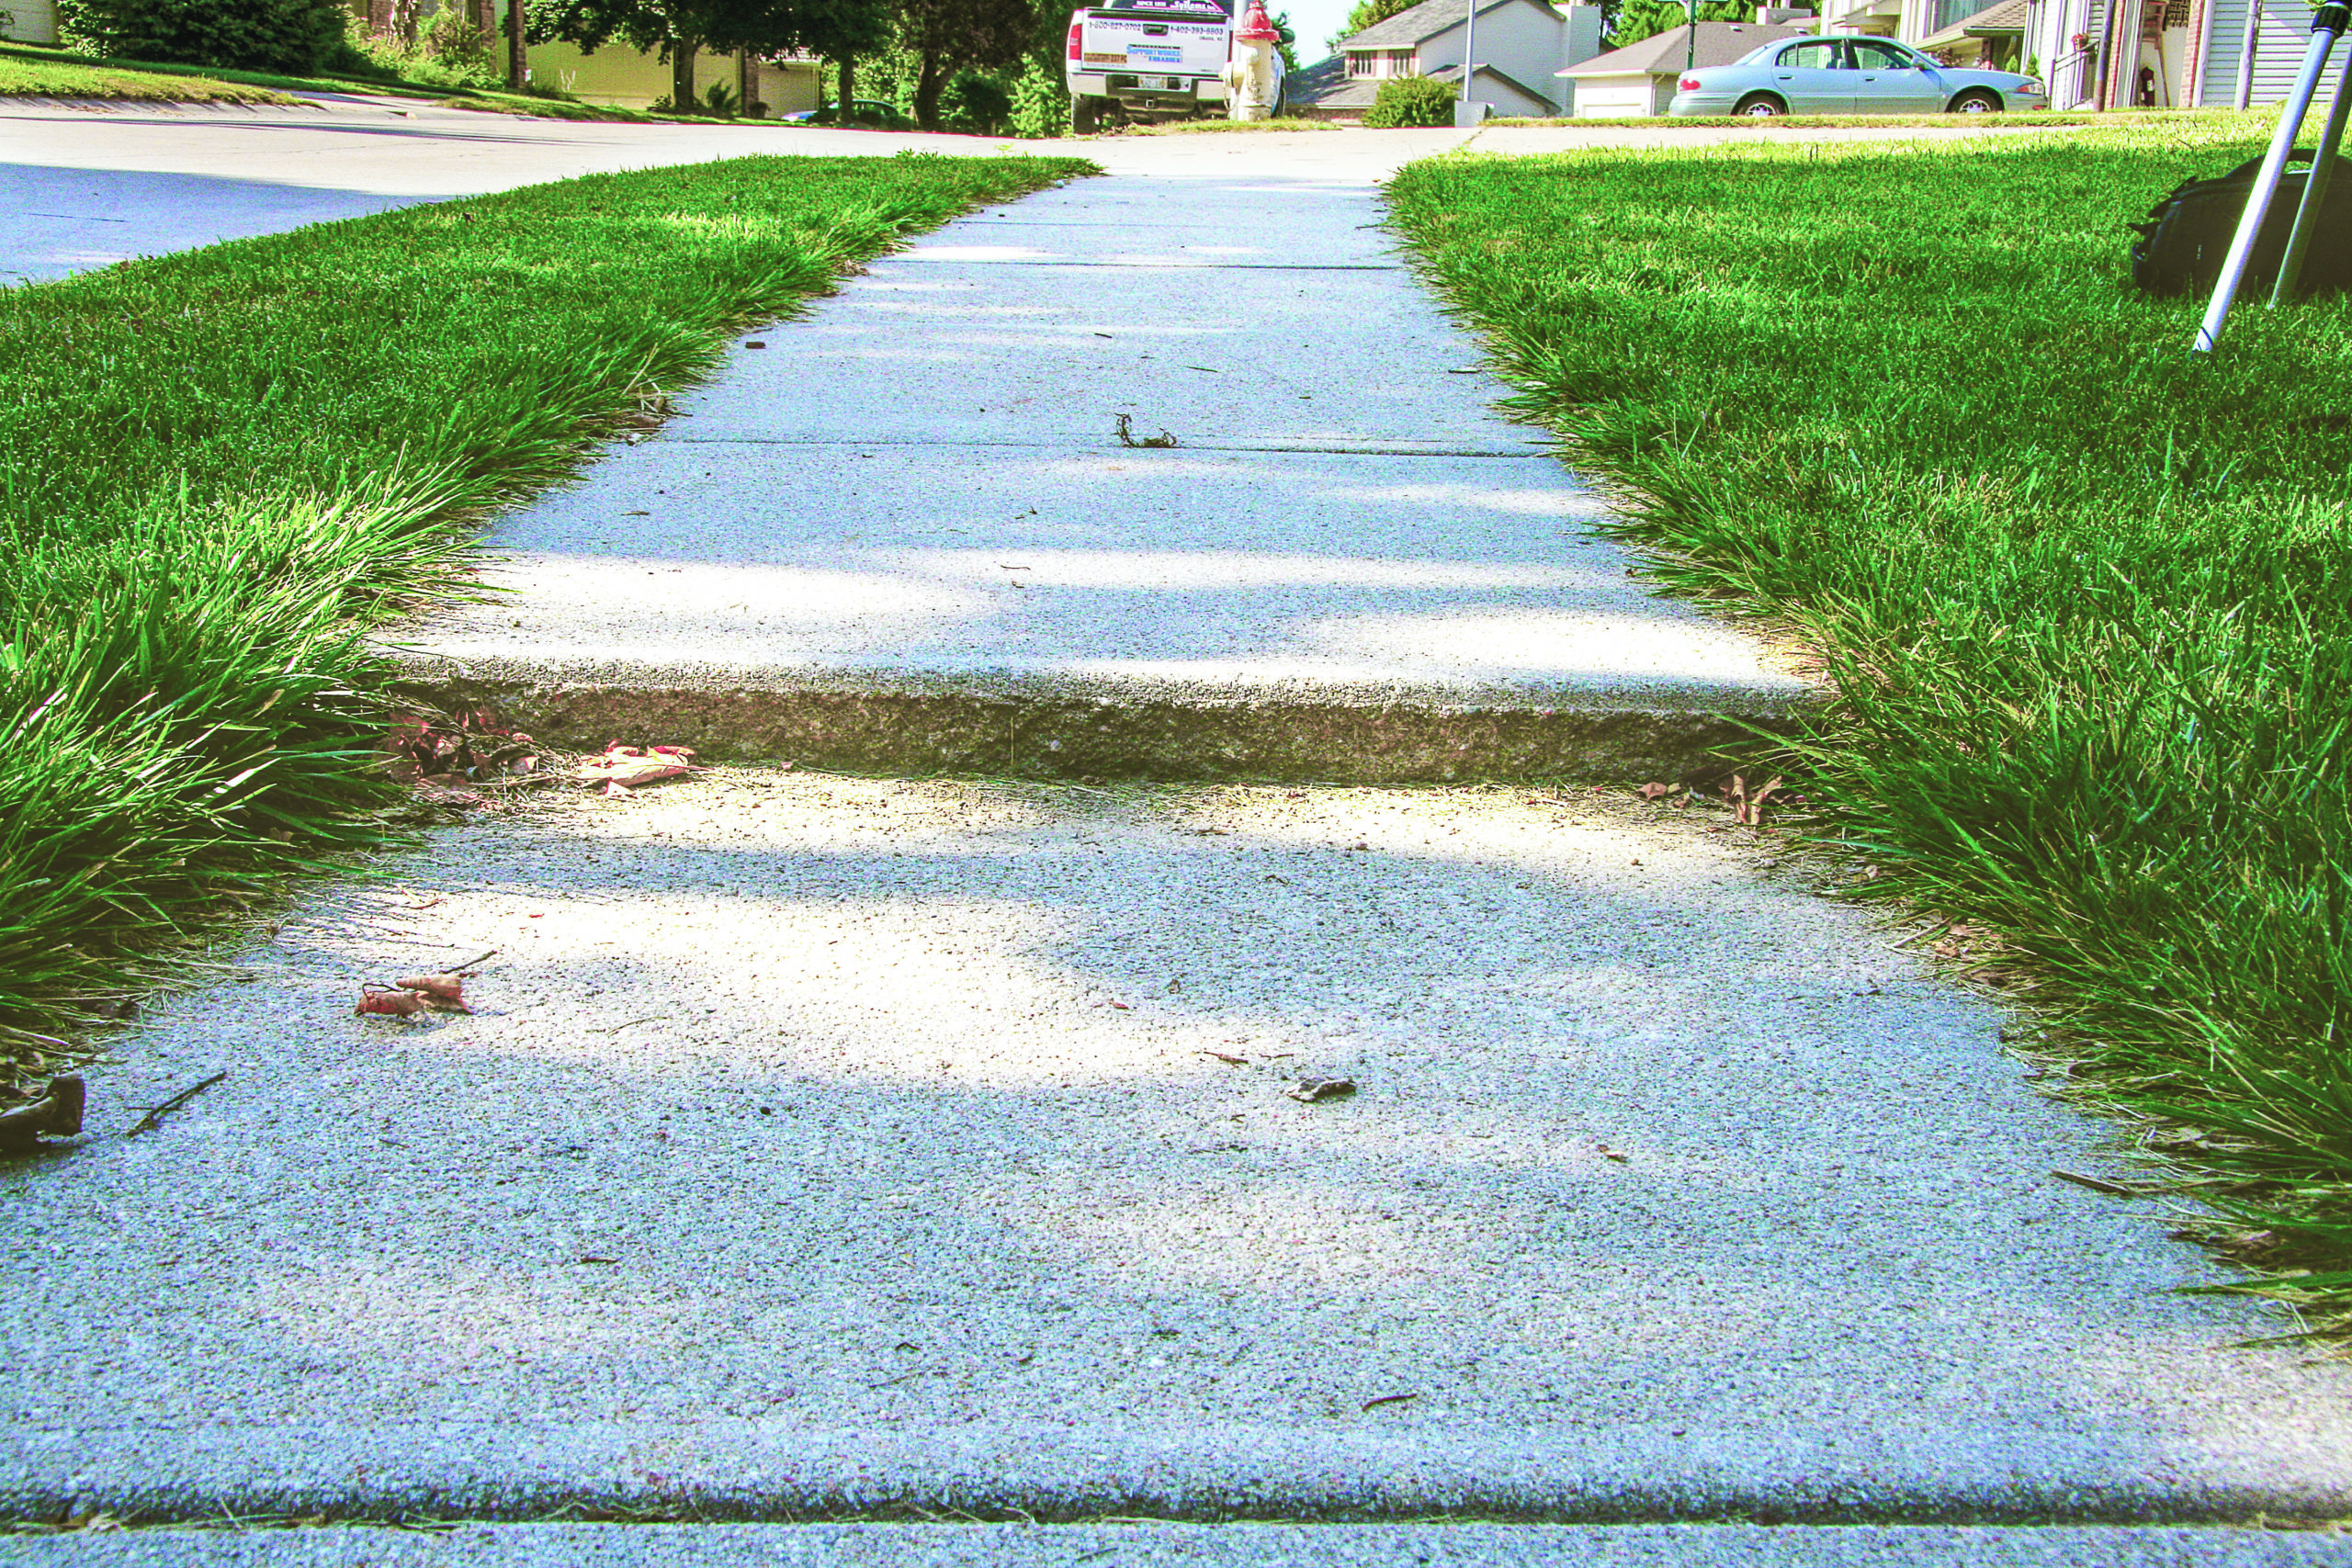 Sidewalk Repair | Uneven Home Sidewalk | Before SmartLevel Concrete Repairs and Leveling